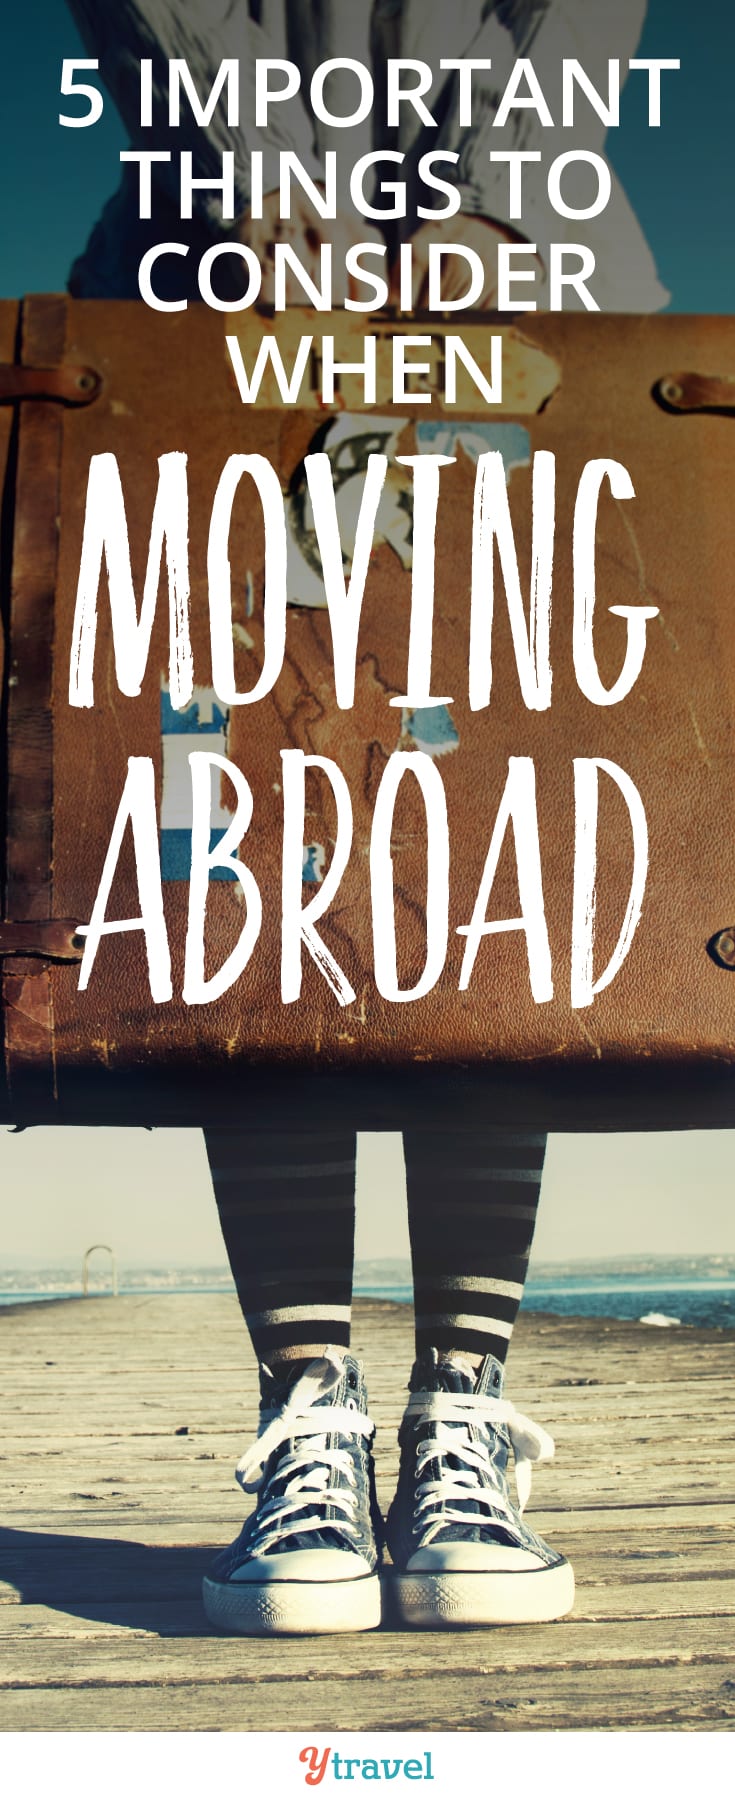 5 important things to consider when moving abroad.